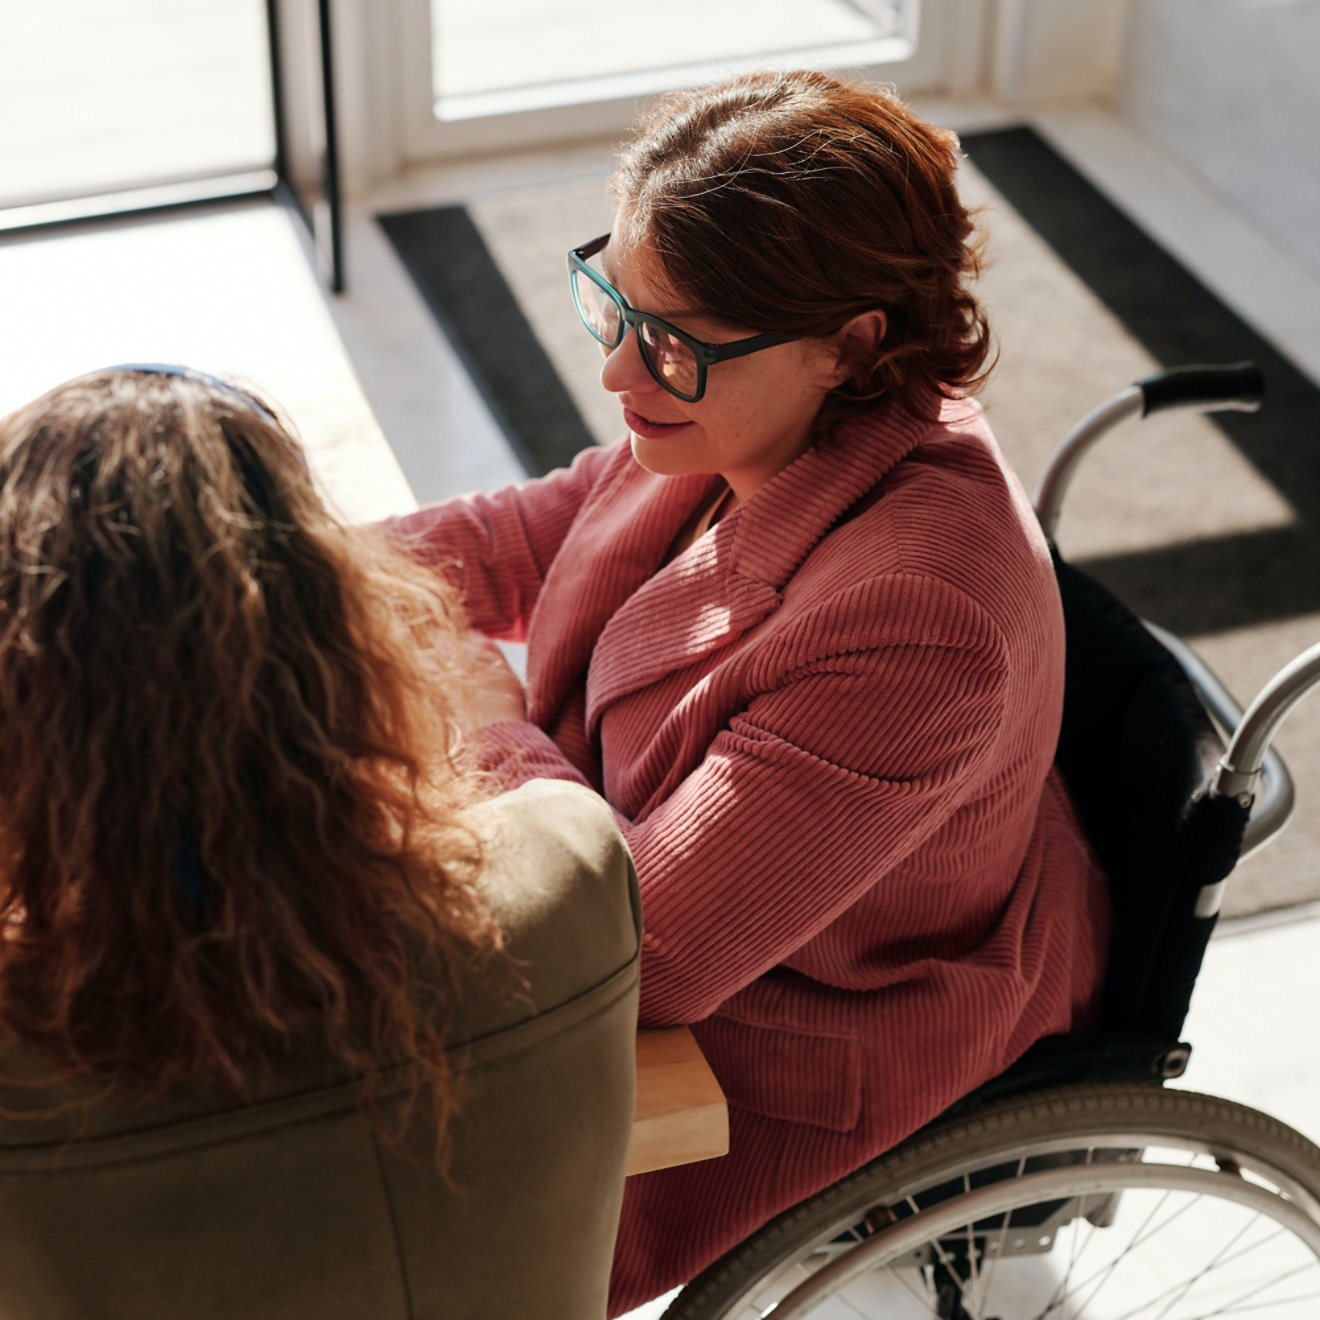 Two business people seated at a desk having a discussion. One is a wheelchair user.